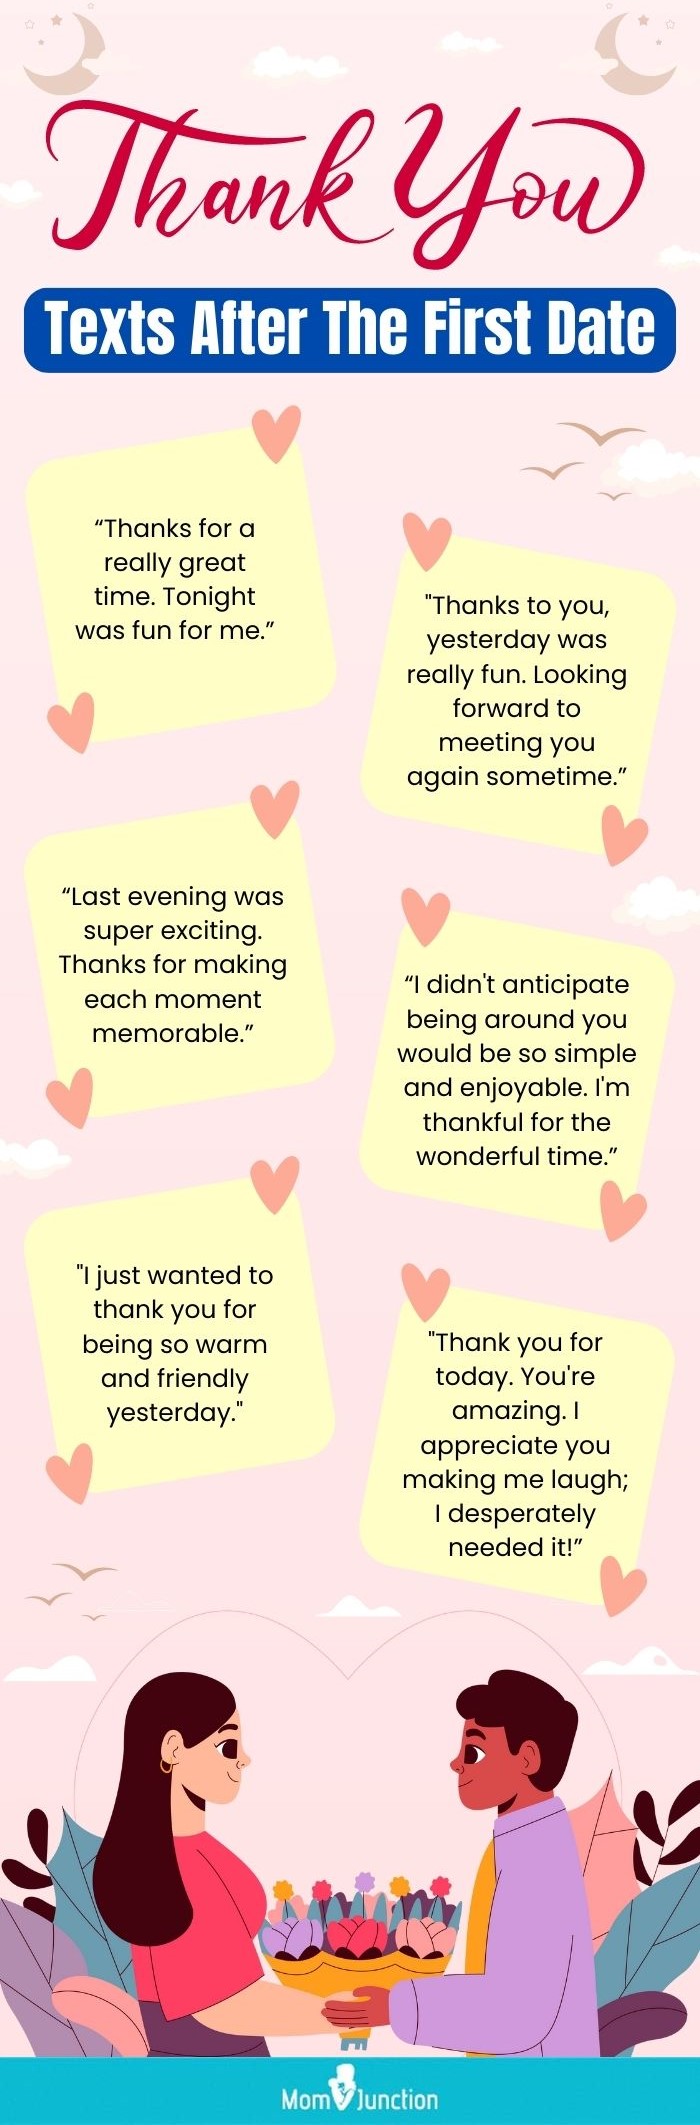 thank you texts after the first date (infographic)